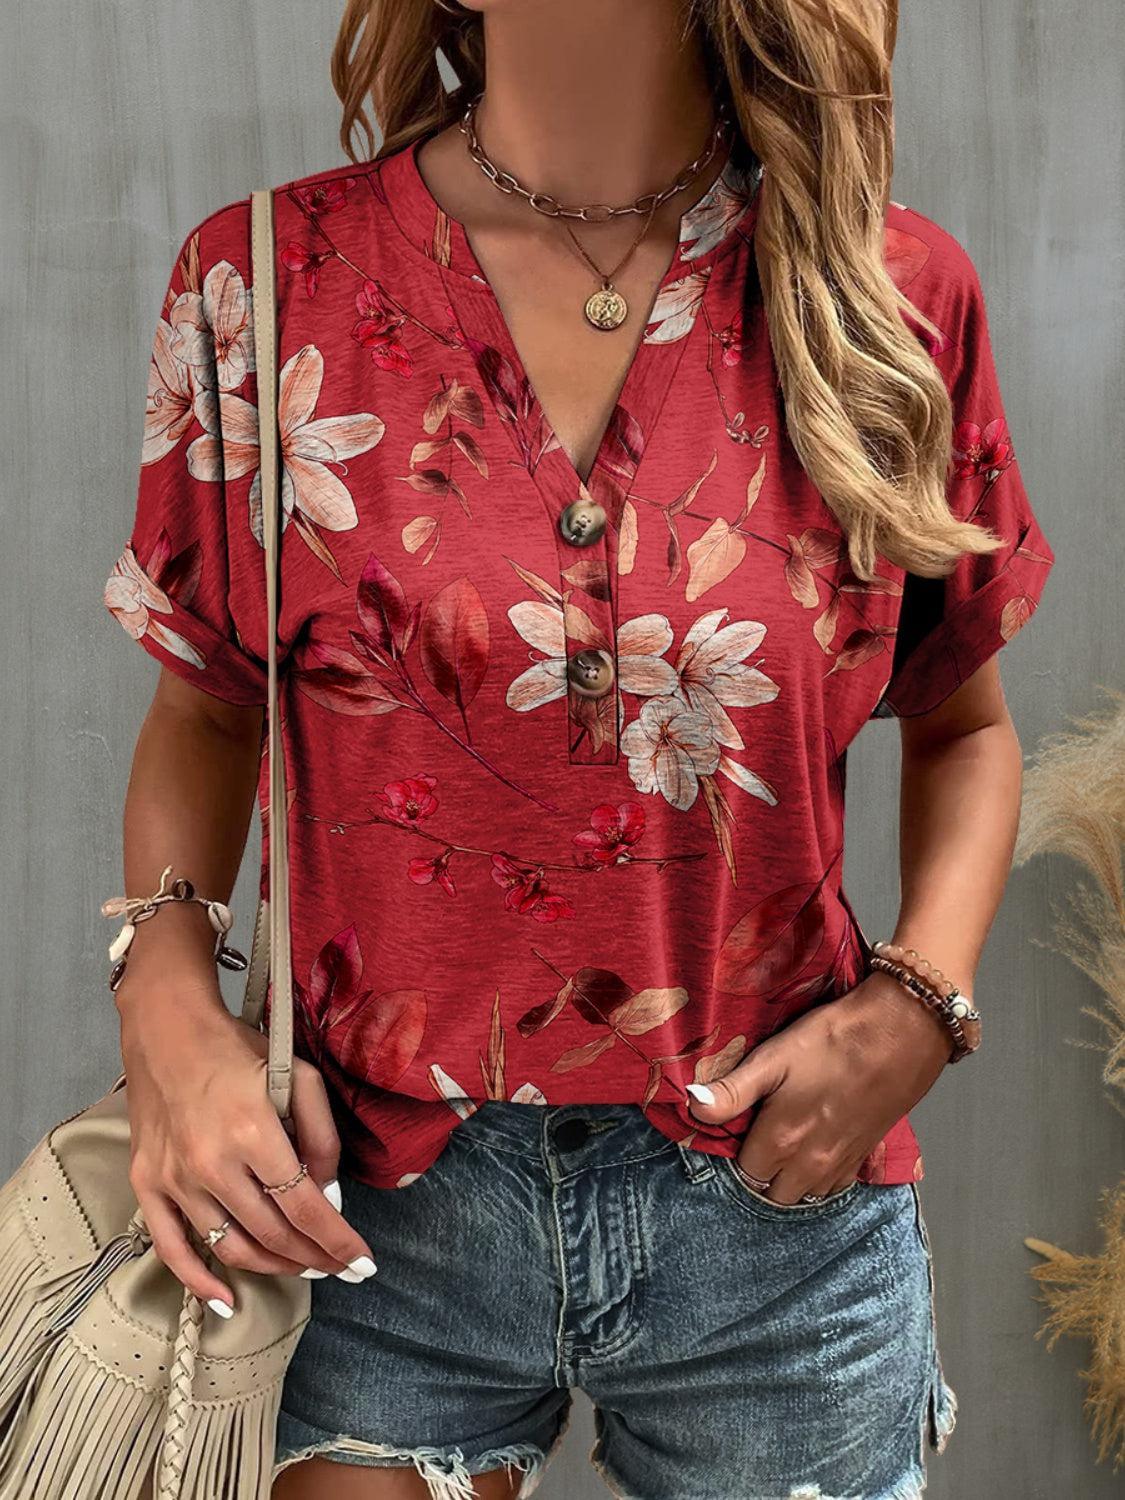 a woman wearing a red floral shirt and ripped shorts